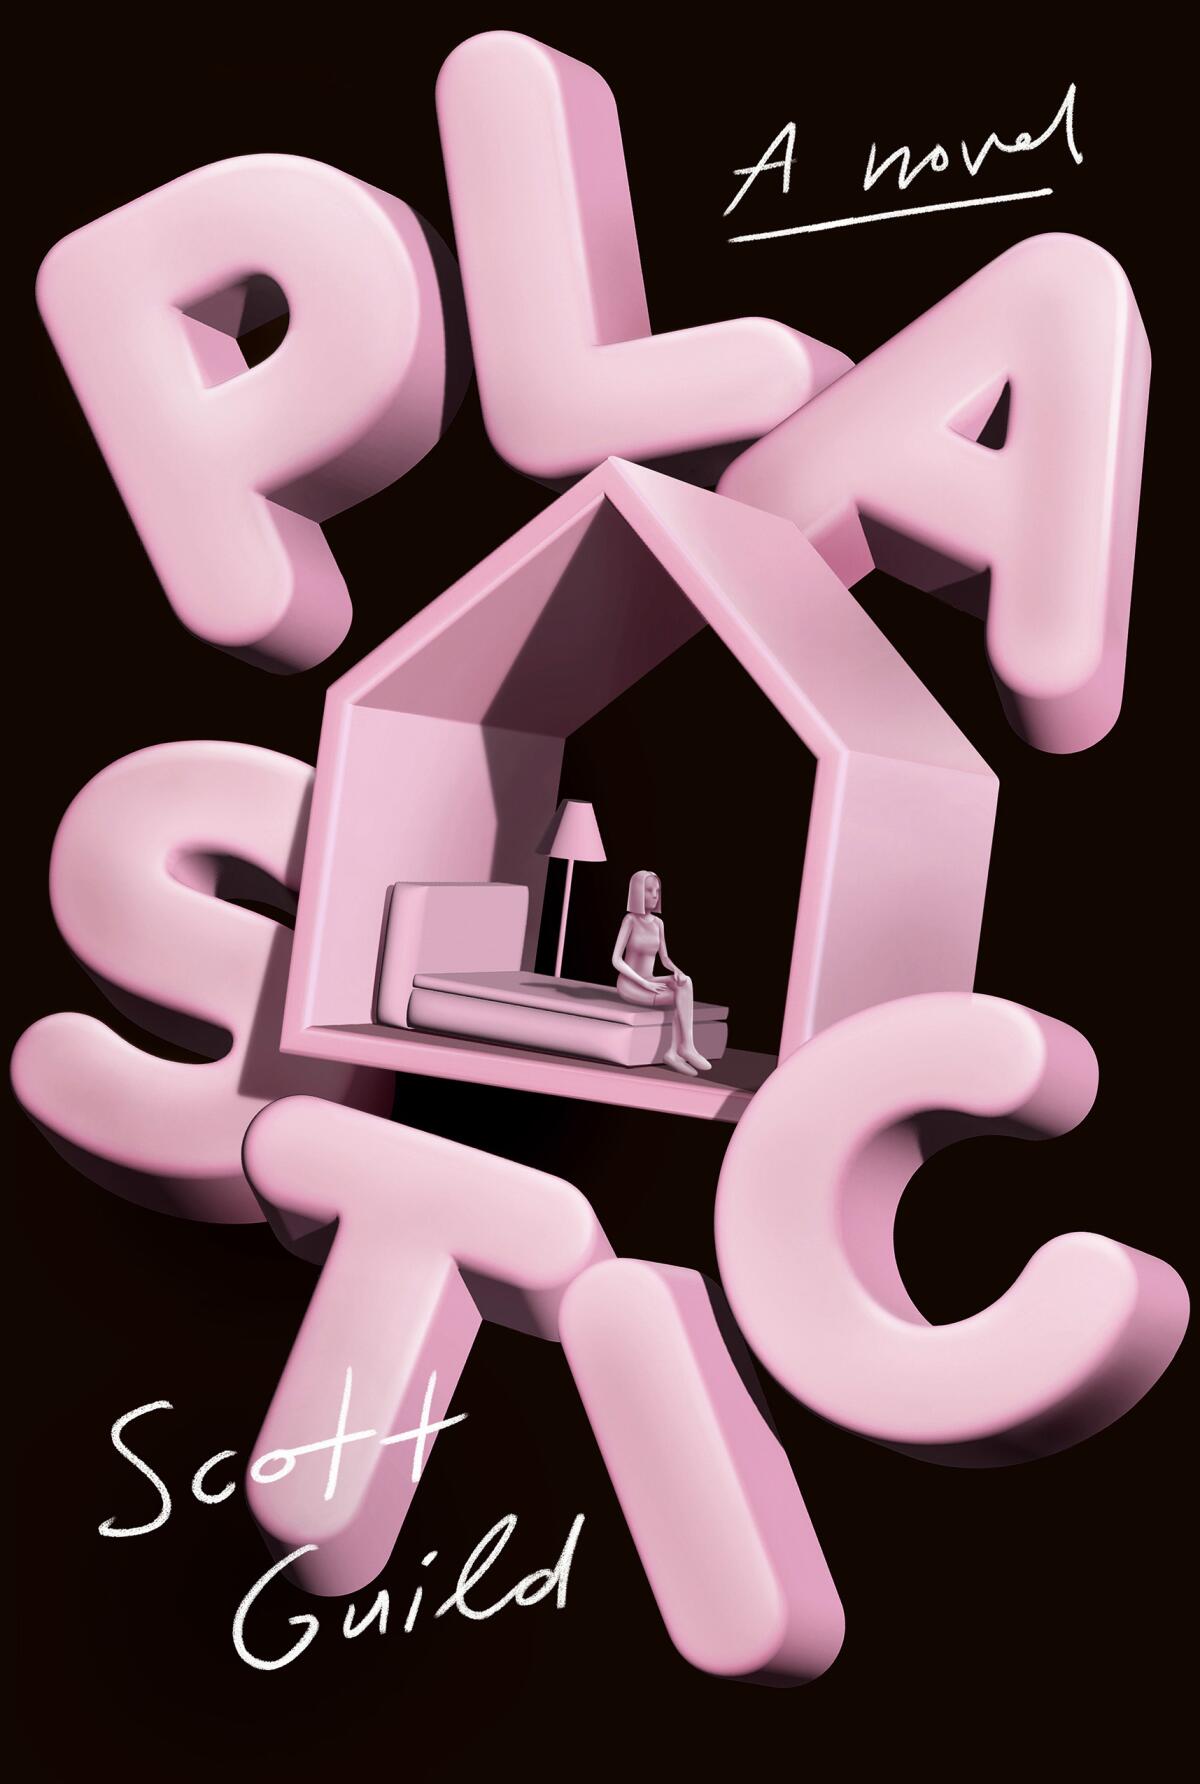 Pink plastic letters form the word "Plastic" around a pink plastic silhouette of a house on the cover of Scott Guild's novel